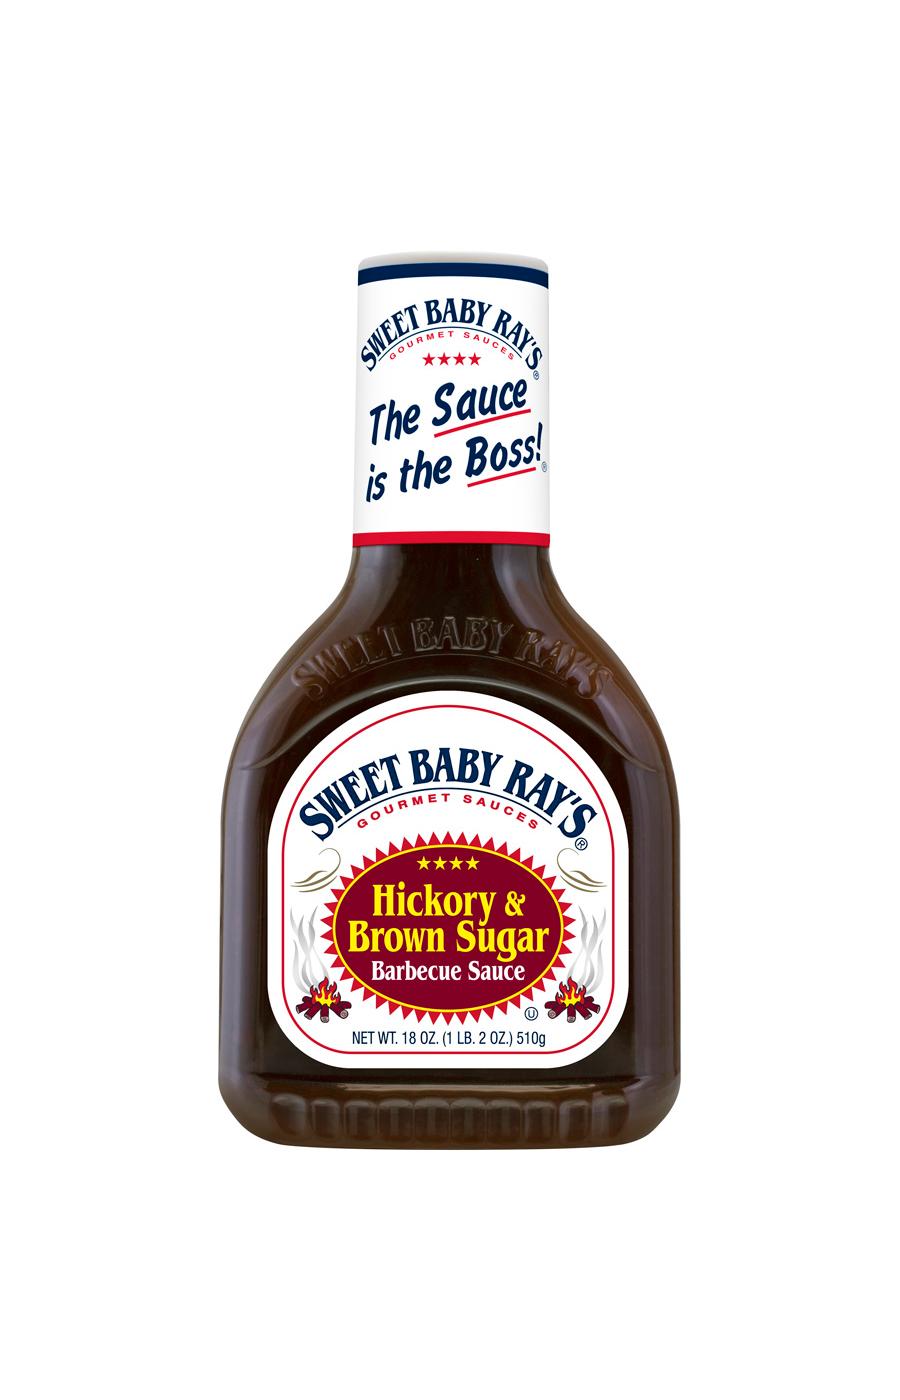 Sweet Baby Ray's Hickory & Brown Sugar Barbecue Sauce; image 1 of 4